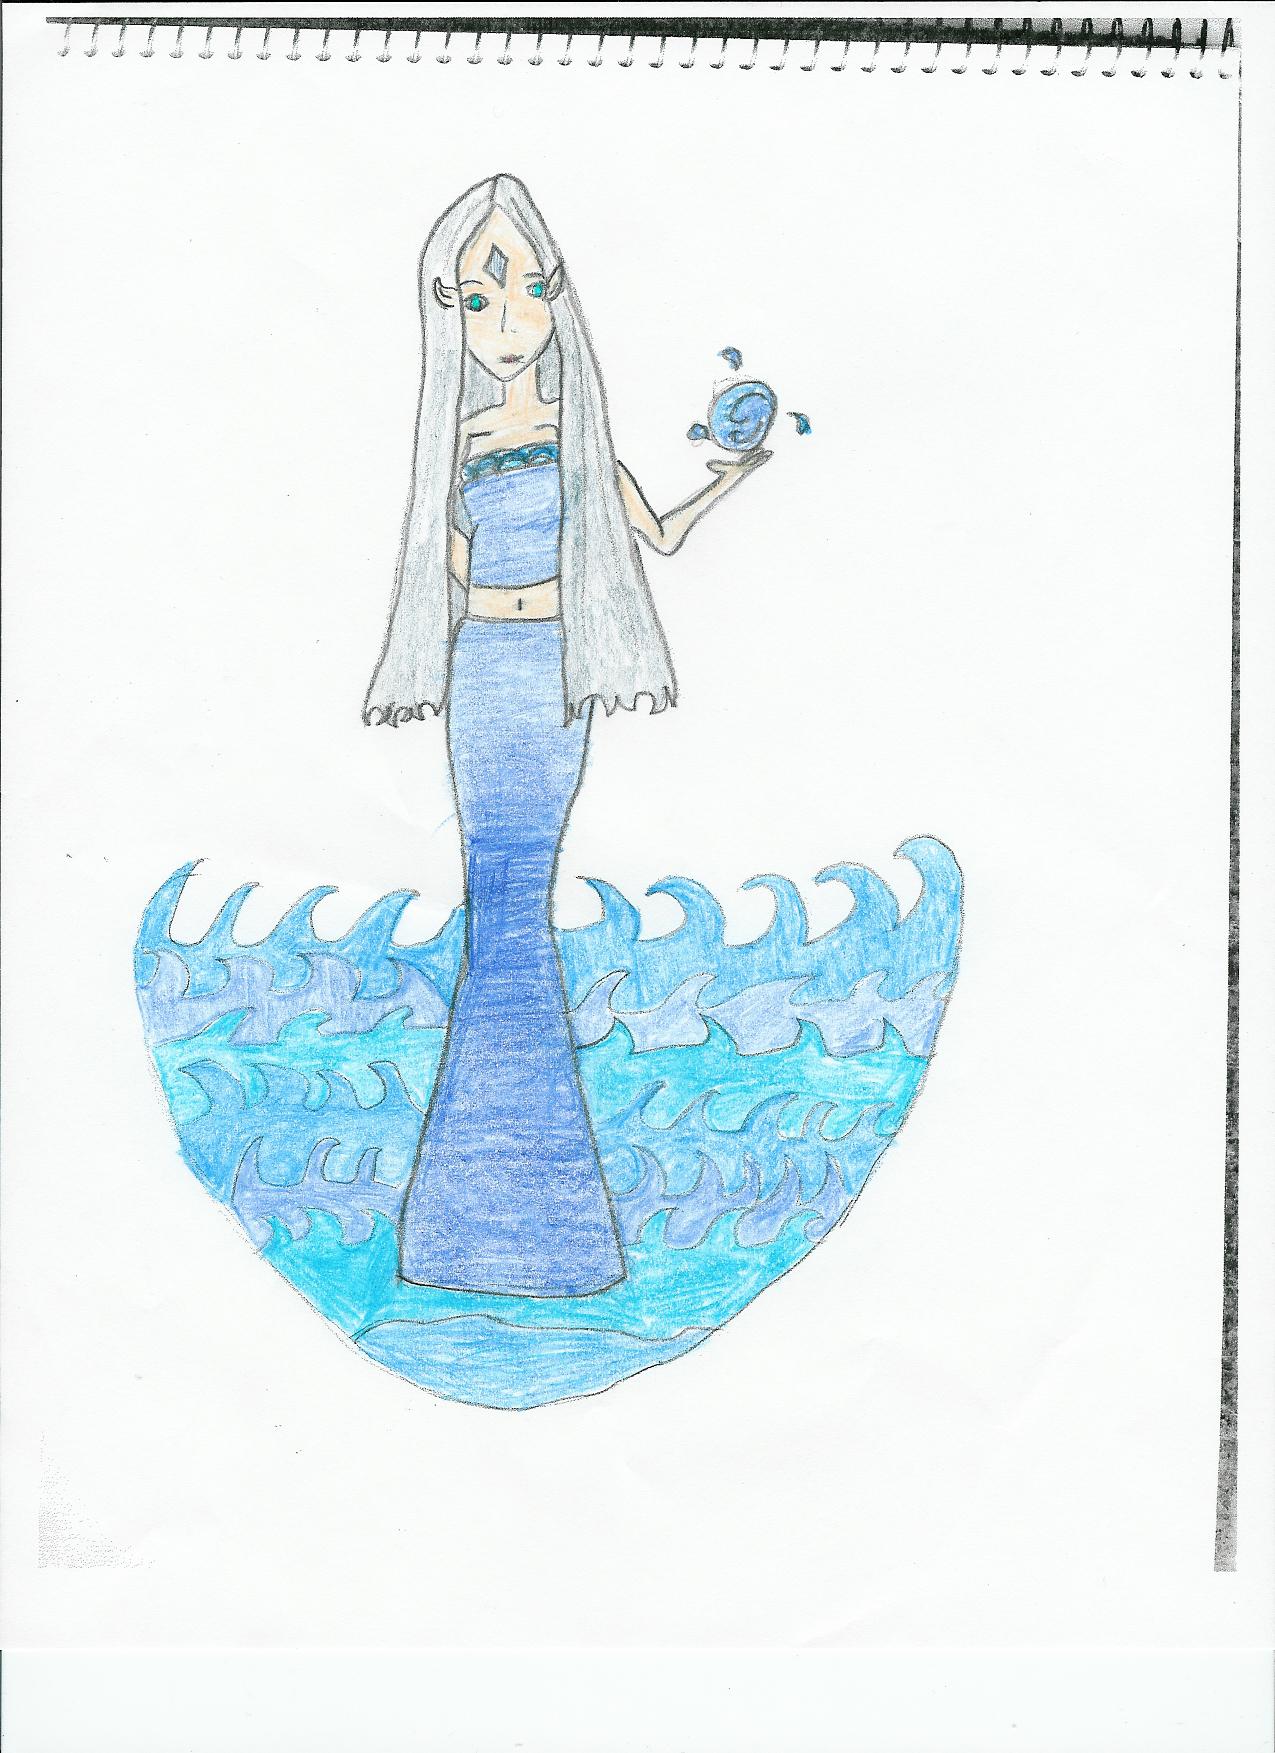 A goddess of water by Pliva